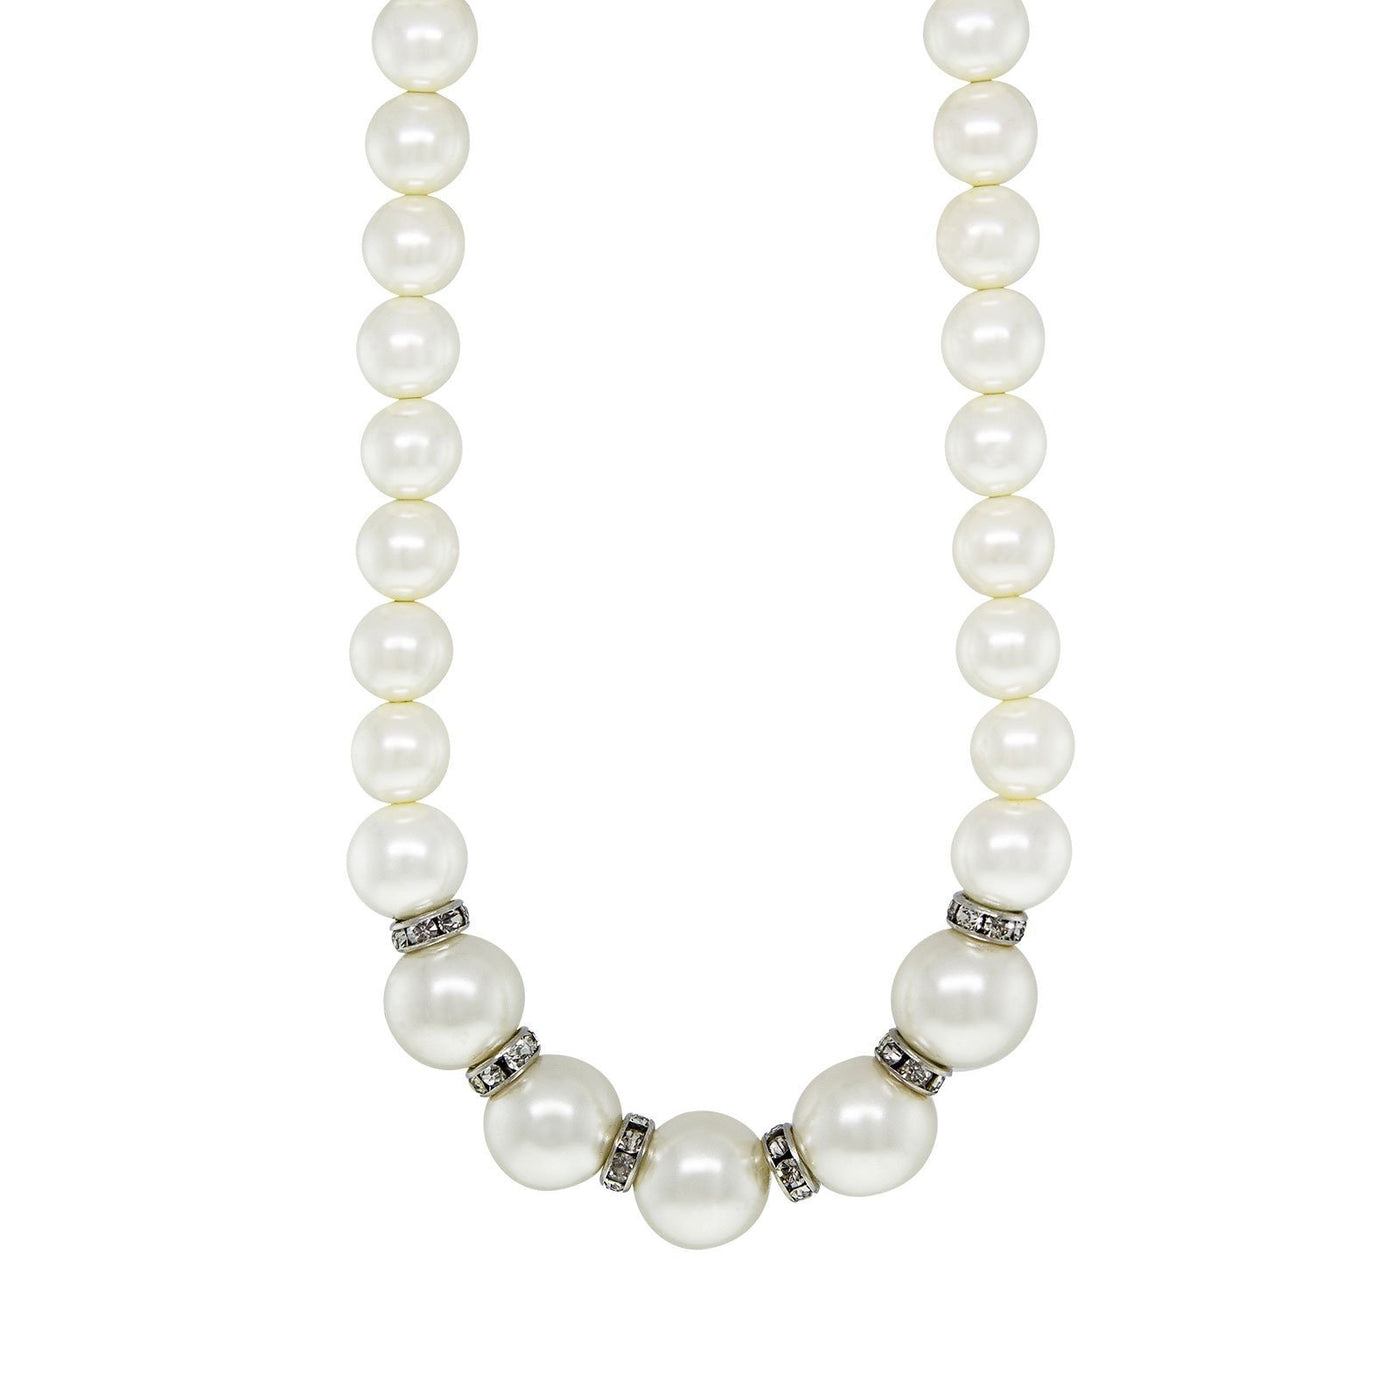 DOWNTON ABBEY PEARL WITH CRYSTAL RONDELLES NECKLACE